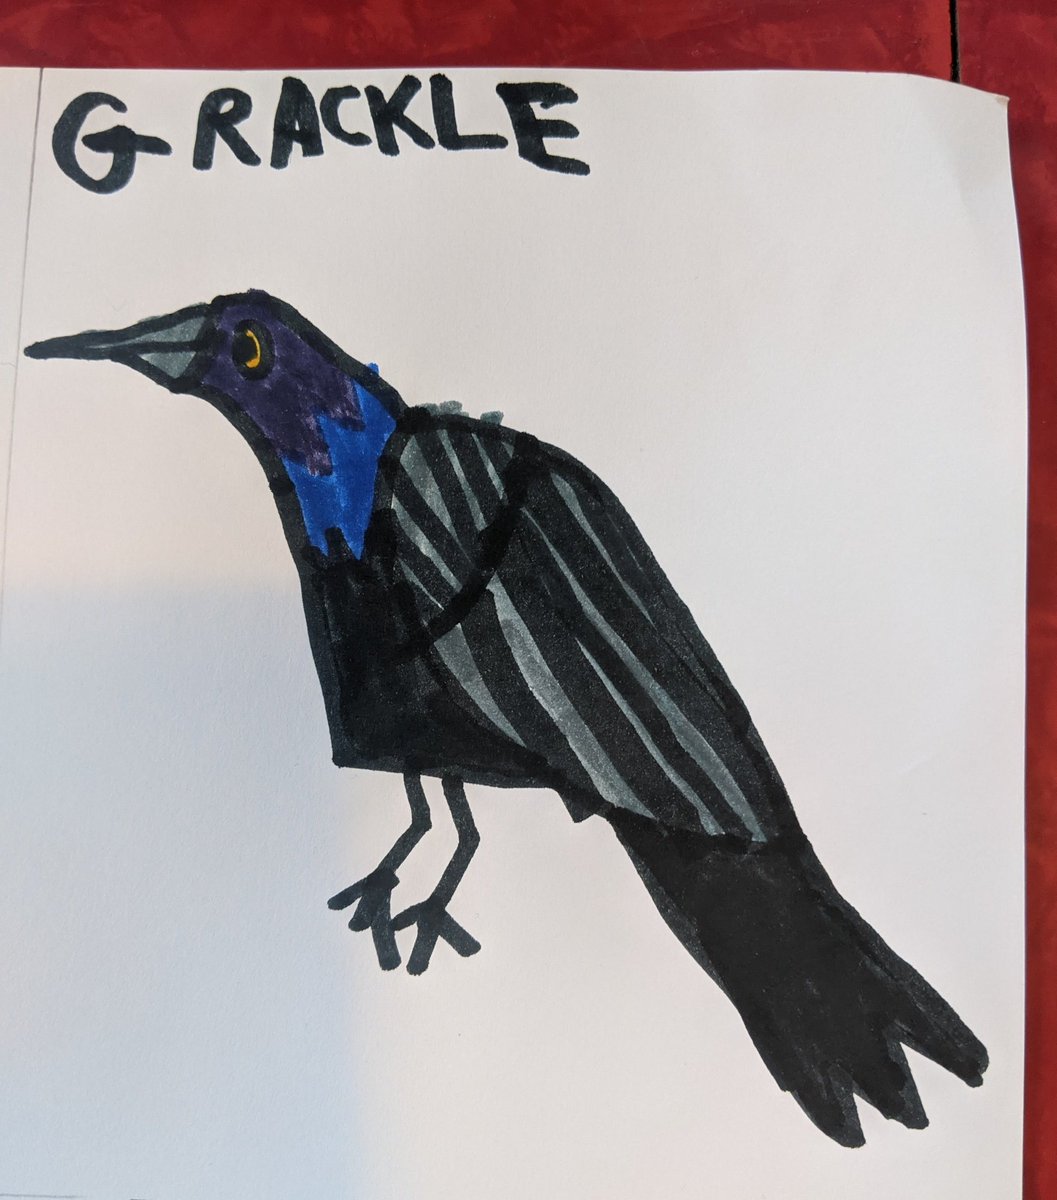 This grackle is one of my fav things he's drawn